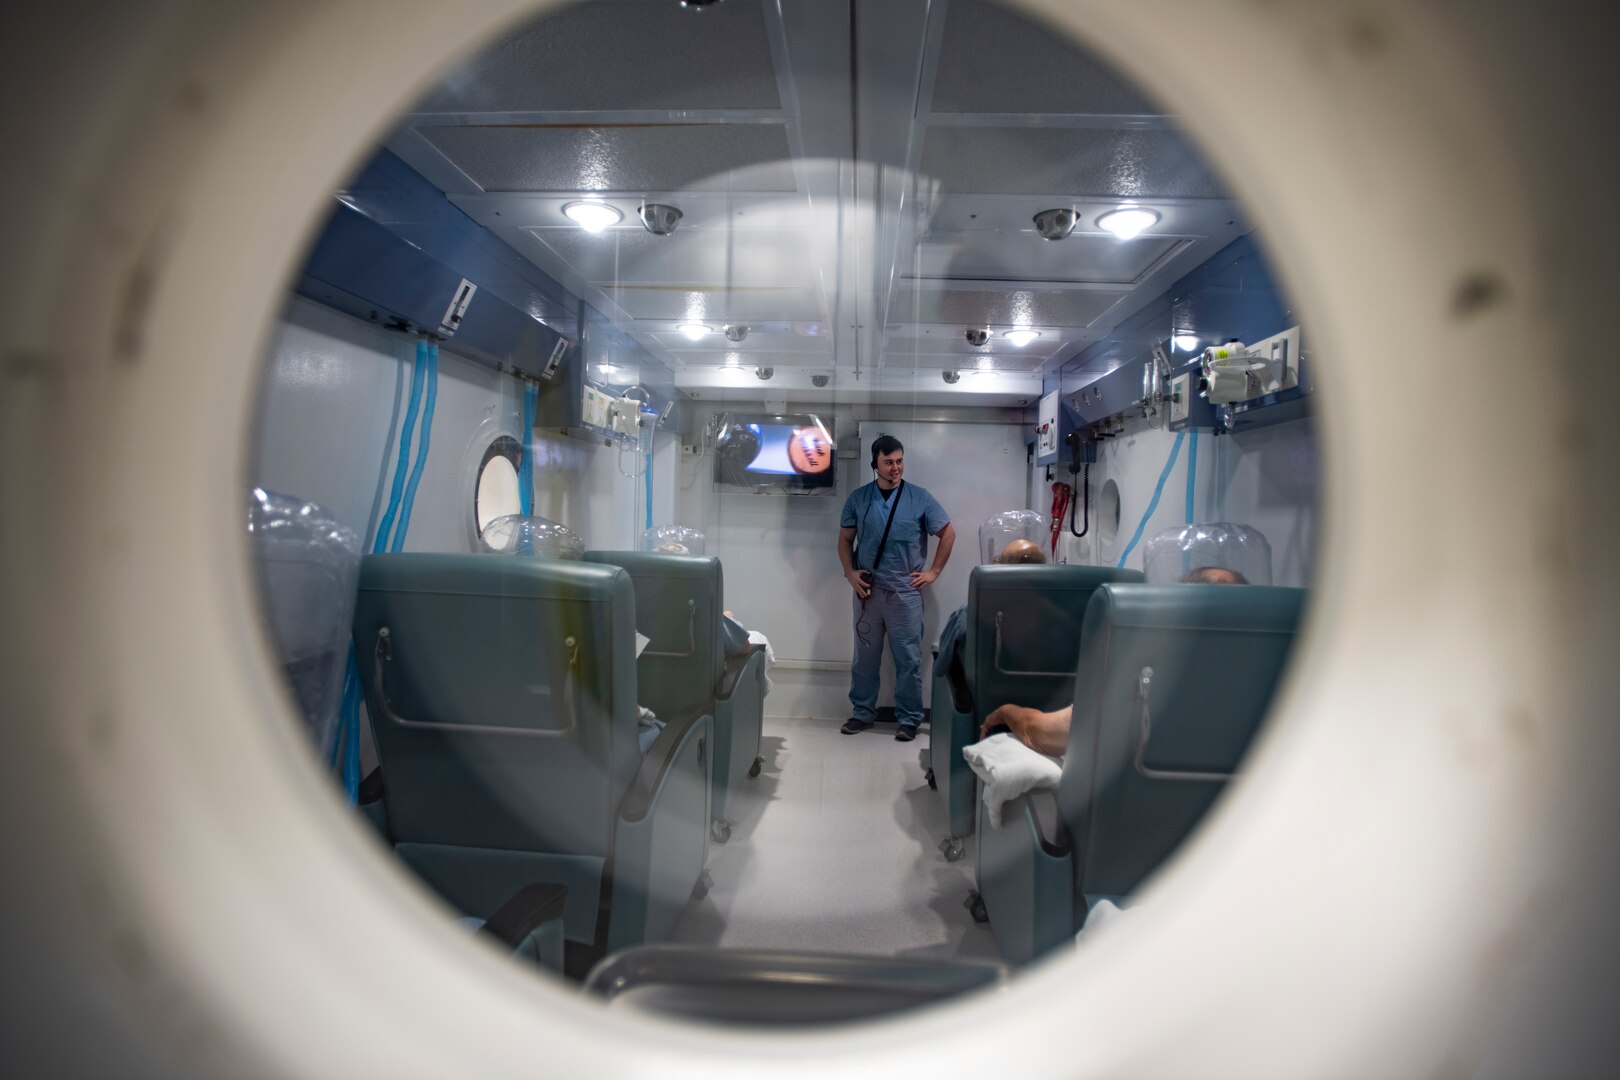 Jeremy Miller, 59th Medical Specialty Squadron hyperbarics licensed practical nurse, monitors patients inside a hyperbaric chamber at Brooke Army Medical Center at Joint Base San Antonio-Fort Sam Houston May 31. The hyperbaric facility at BAMC gets referrals from throughout the Defense Department, as well as from civilian trauma and burn centers in the San Antonio area.